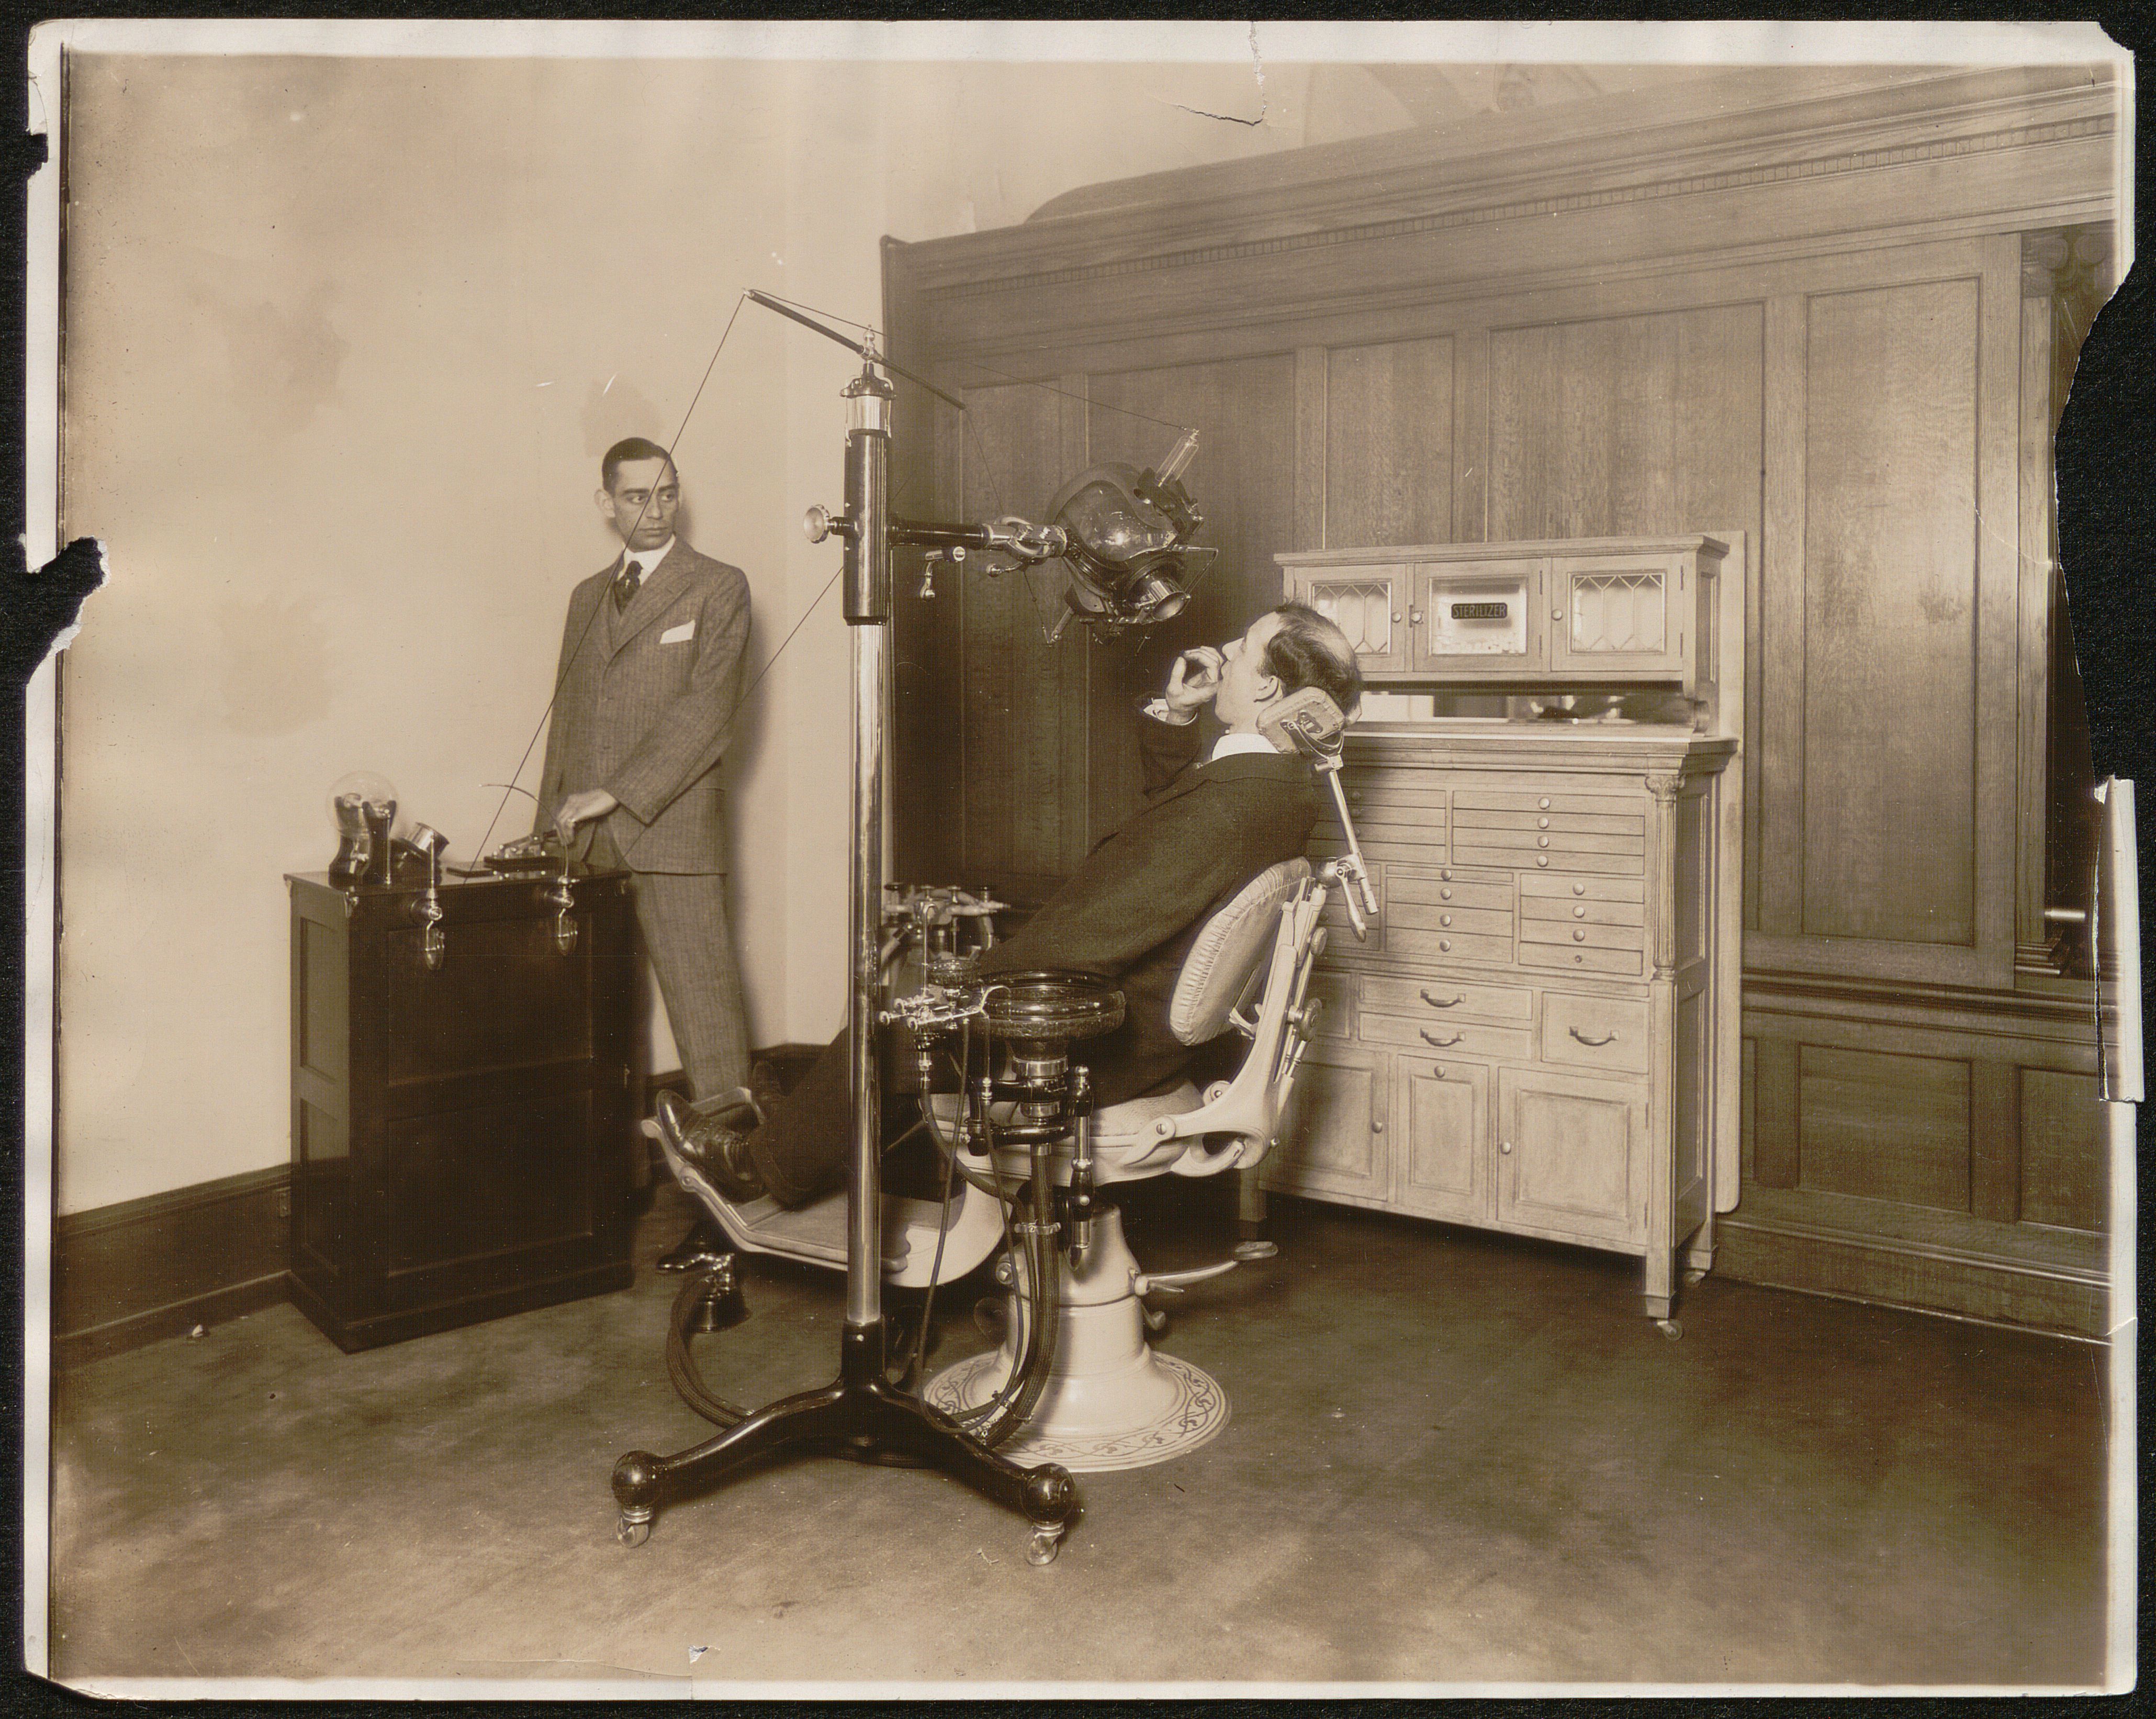 Black and white photograph showing a demonstration of dental x-ray equipment.